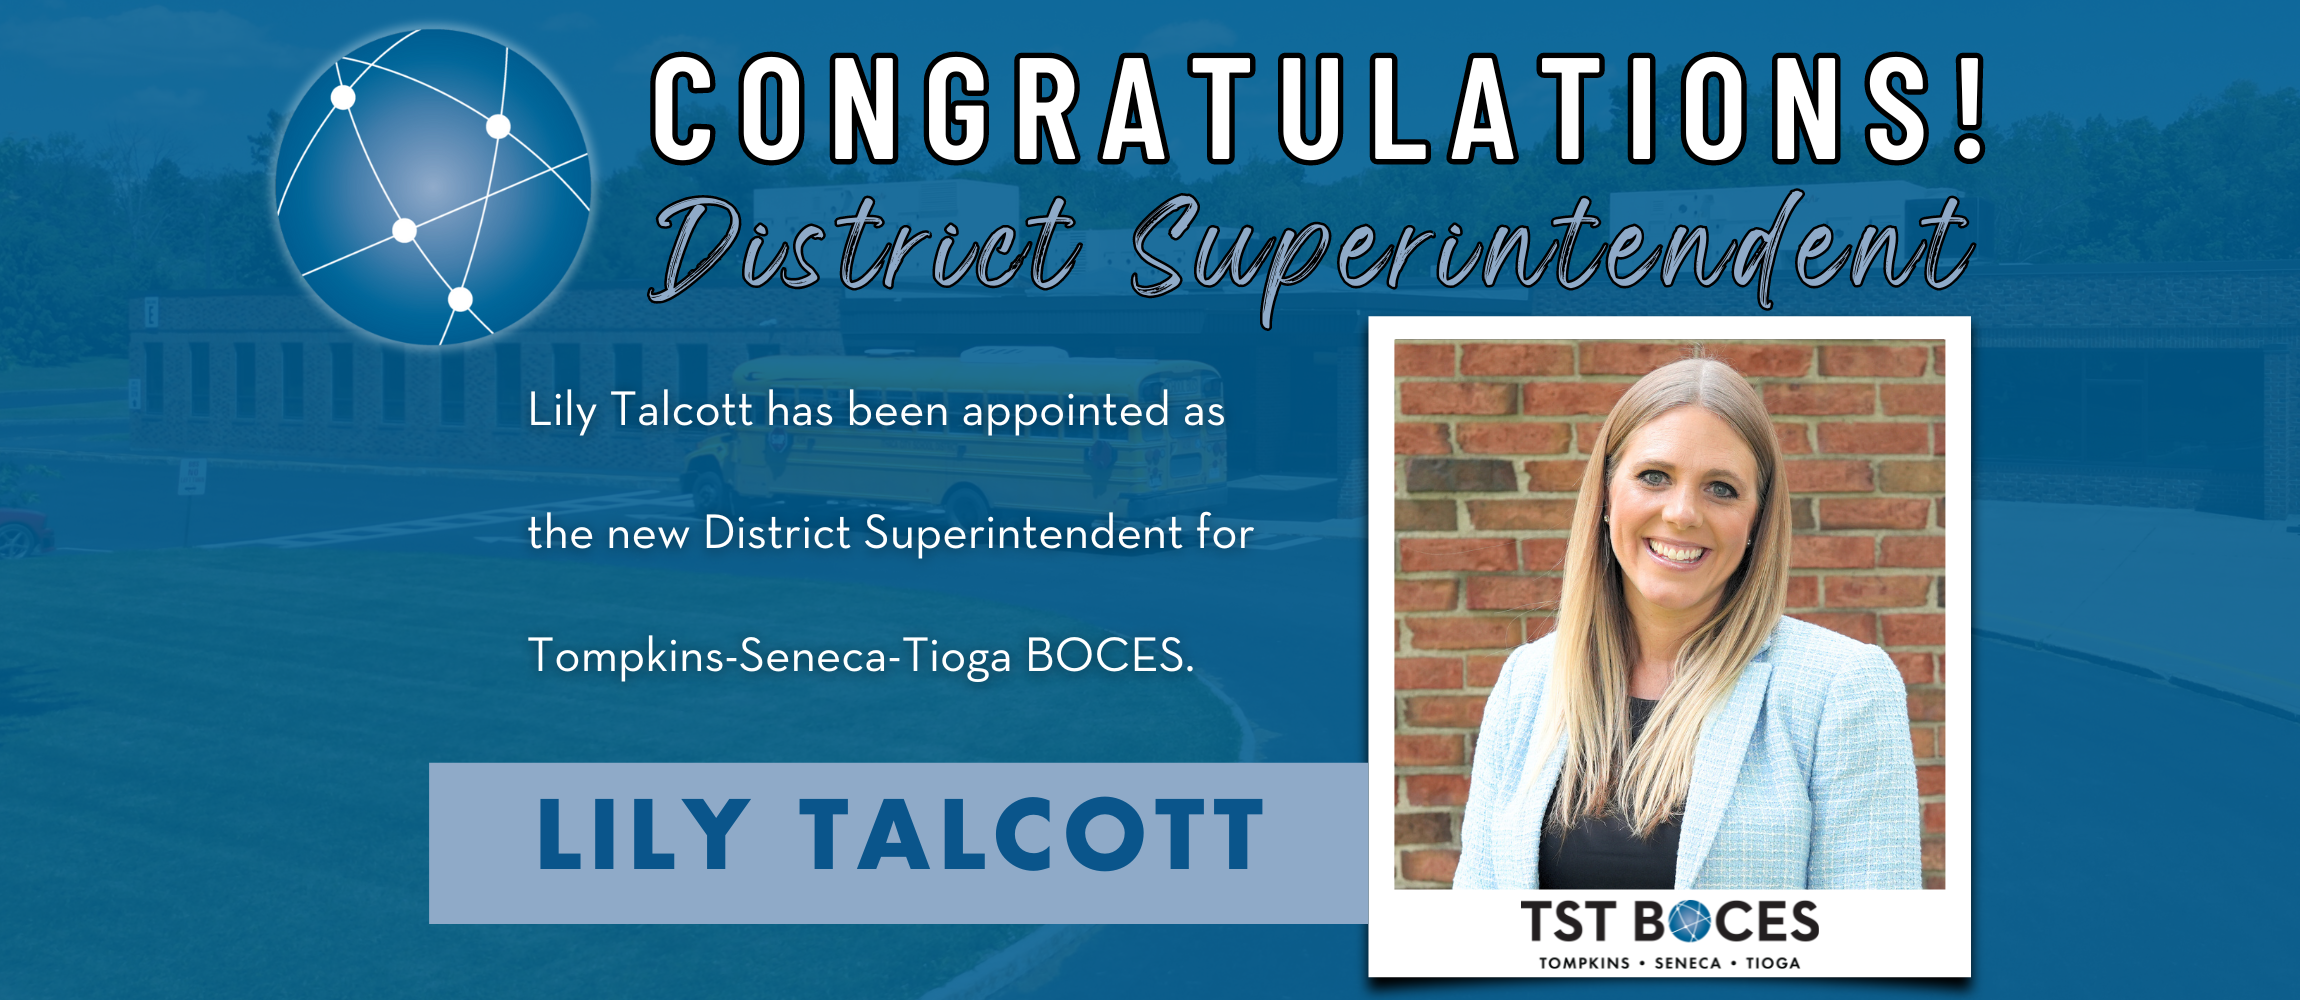 Congratulations Lily Talcott - New District Superintendent of TST BOCES